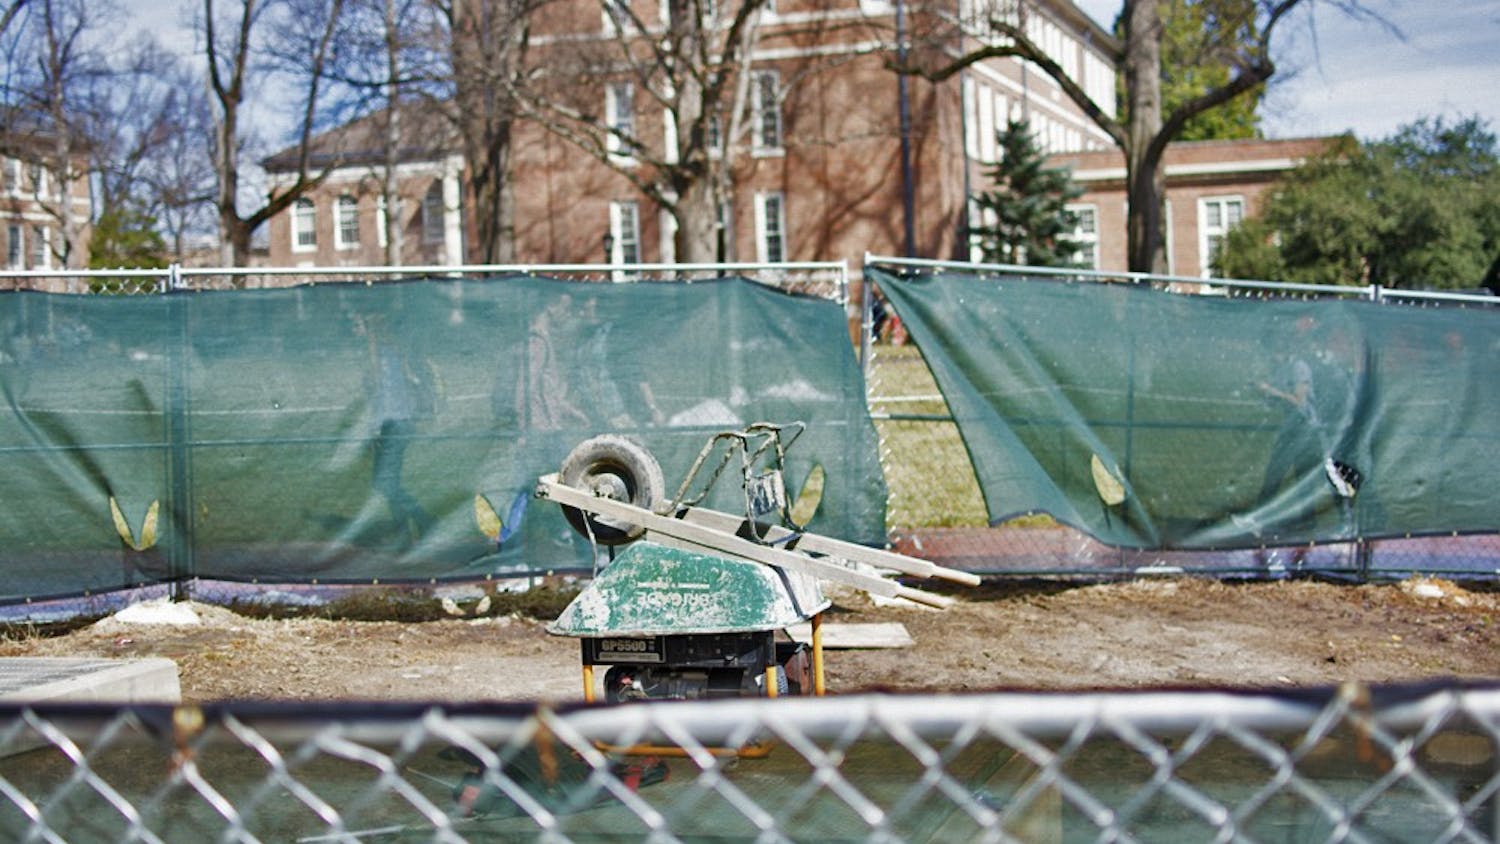 Construction equipment has cluttered the quad since August.  The recent snowstorms have postponed the project that is now expected to finish in April.